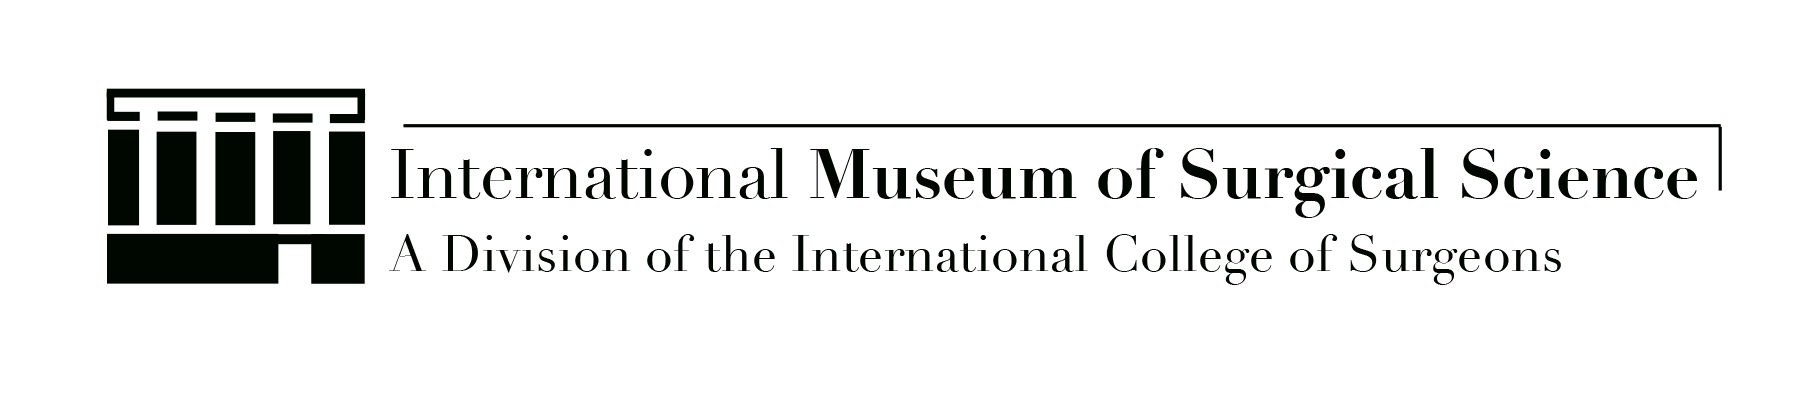 the International Museum of Surgical Science logo